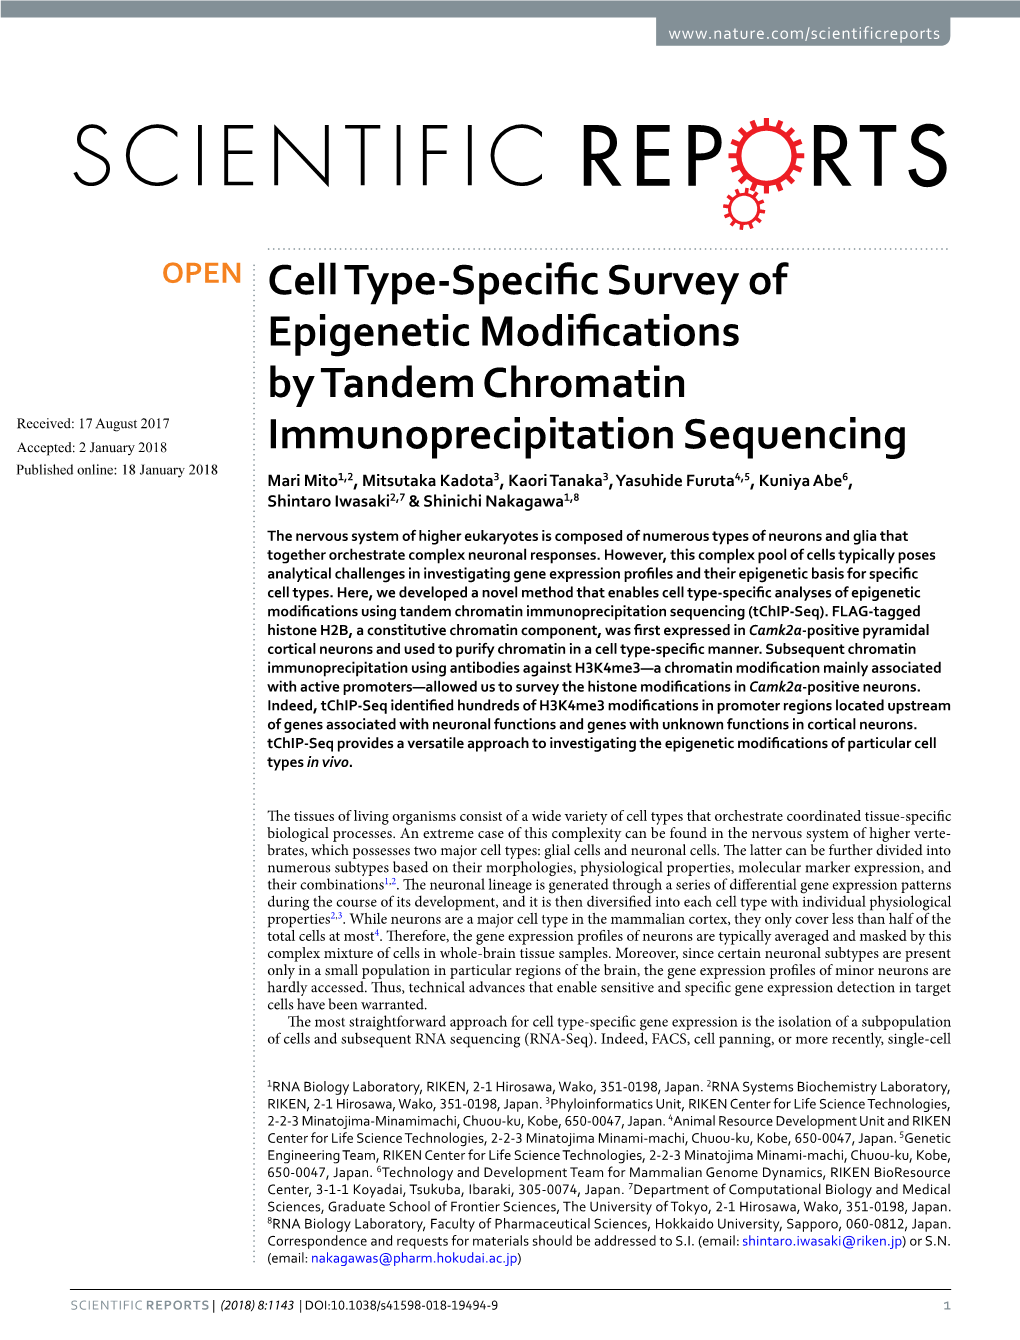 Cell Type-Specific Survey of Epigenetic Modifications By